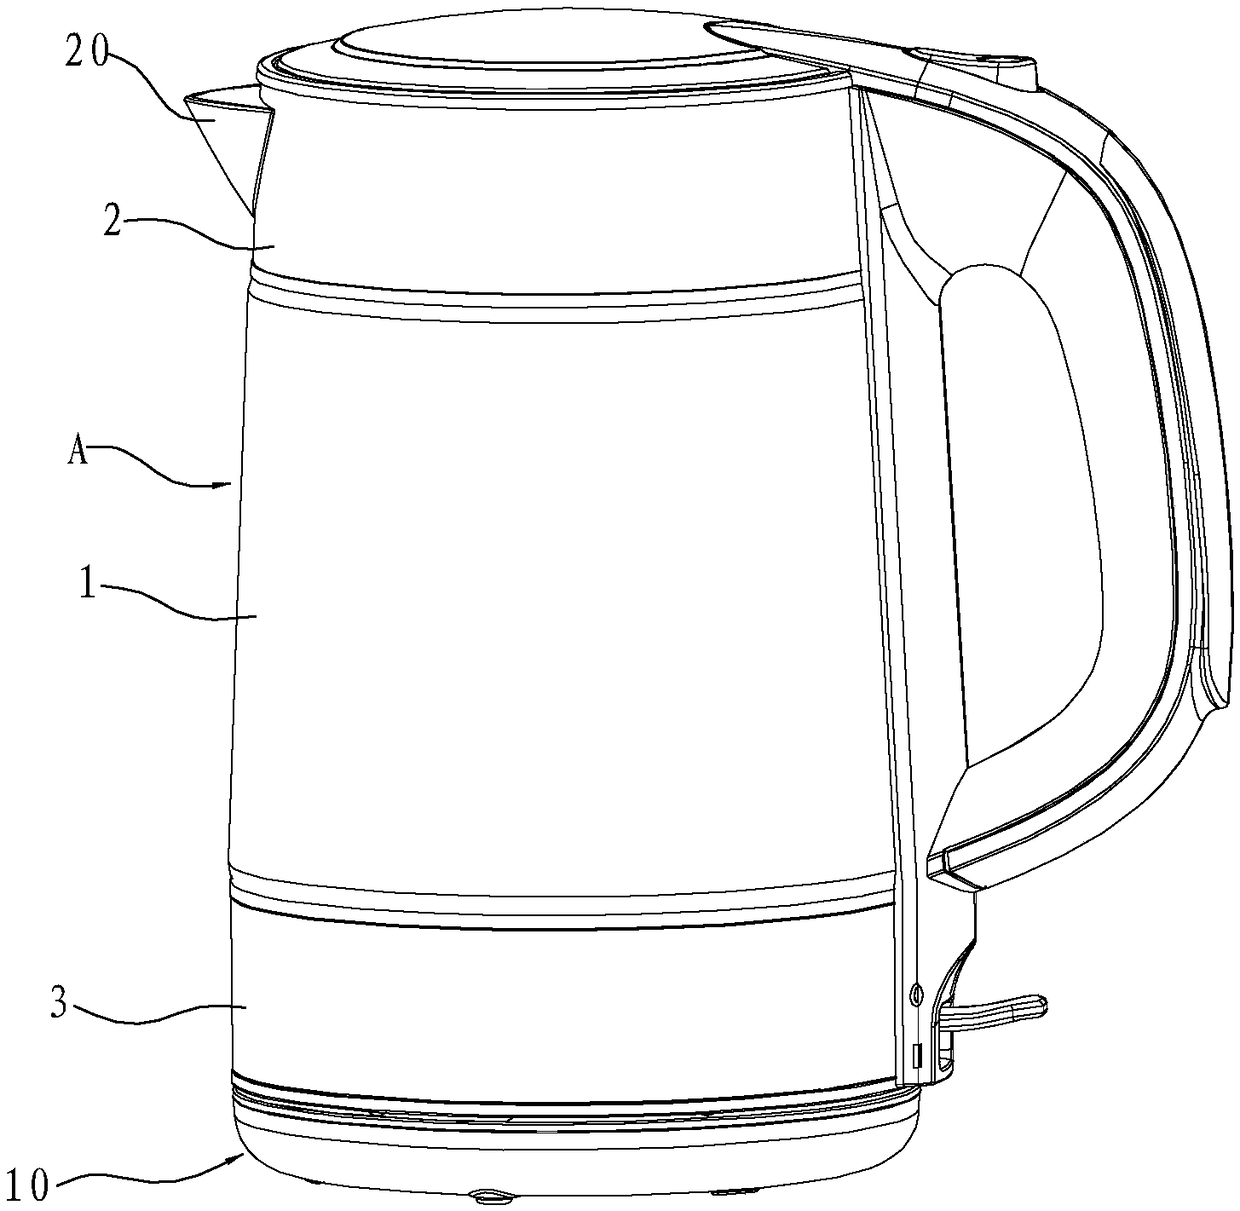 A glass electric kettle